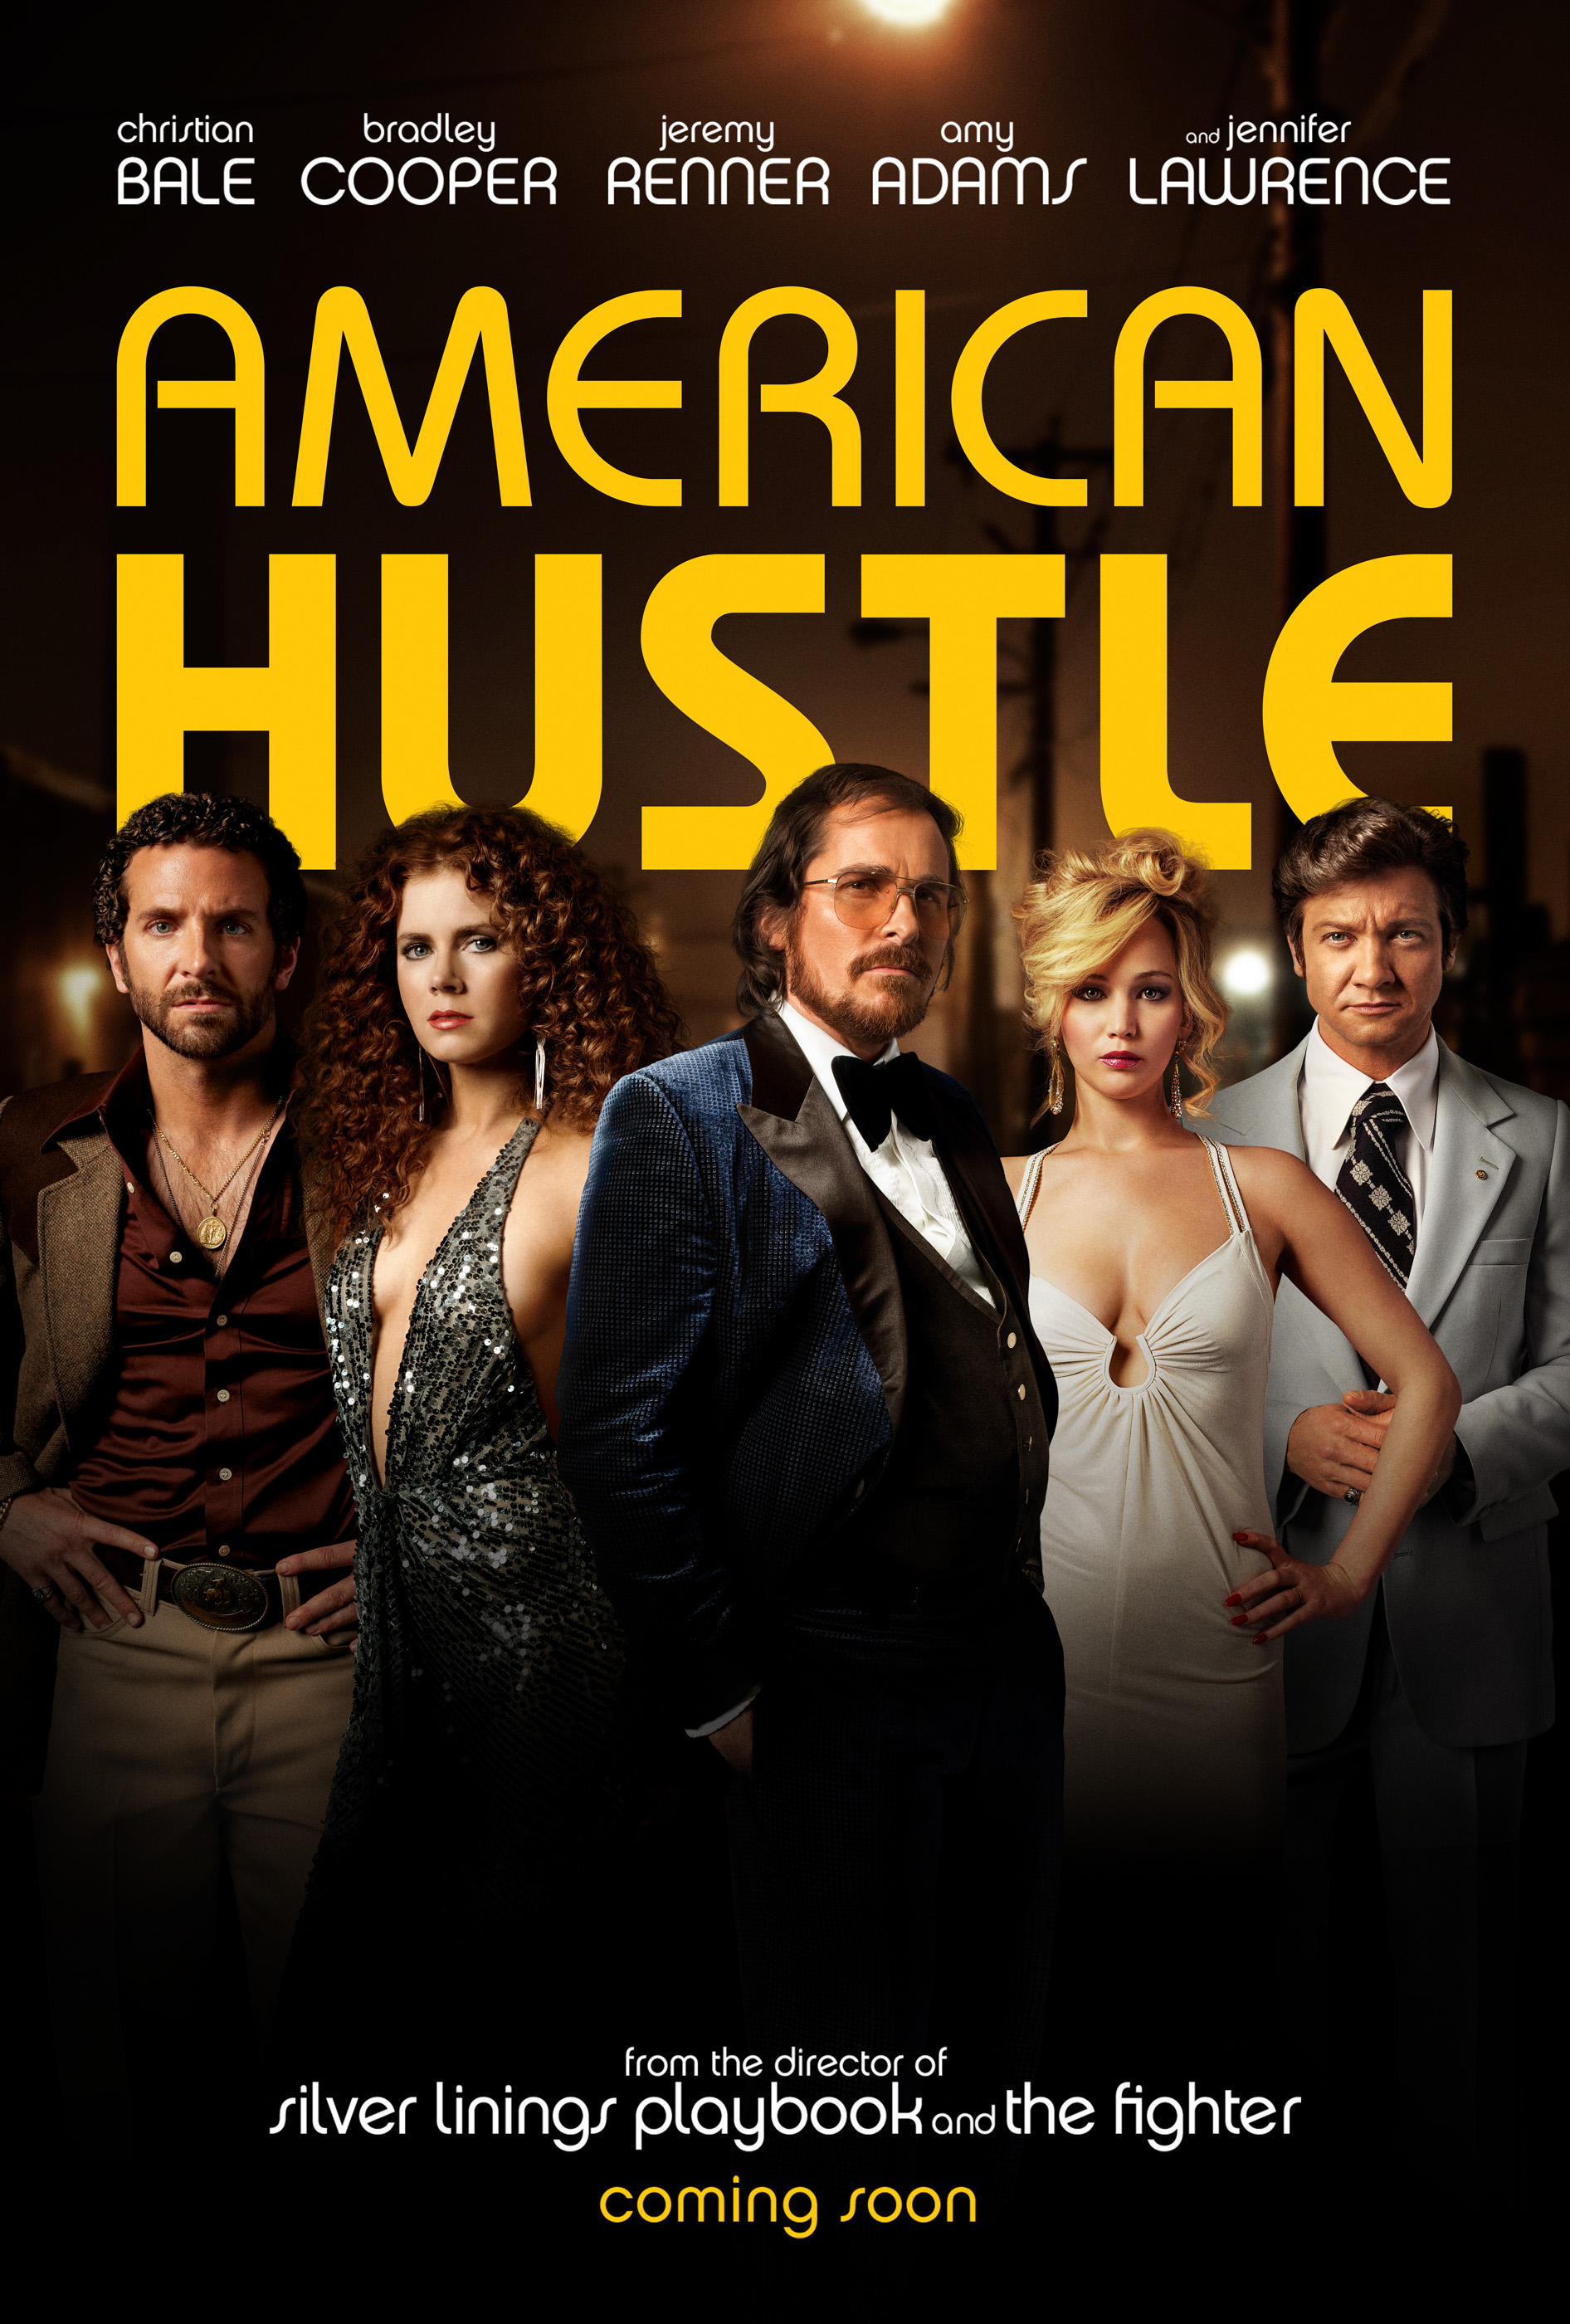 One-sheet posters for David O. Russell's American Hustle - Scannain1892 x 2800